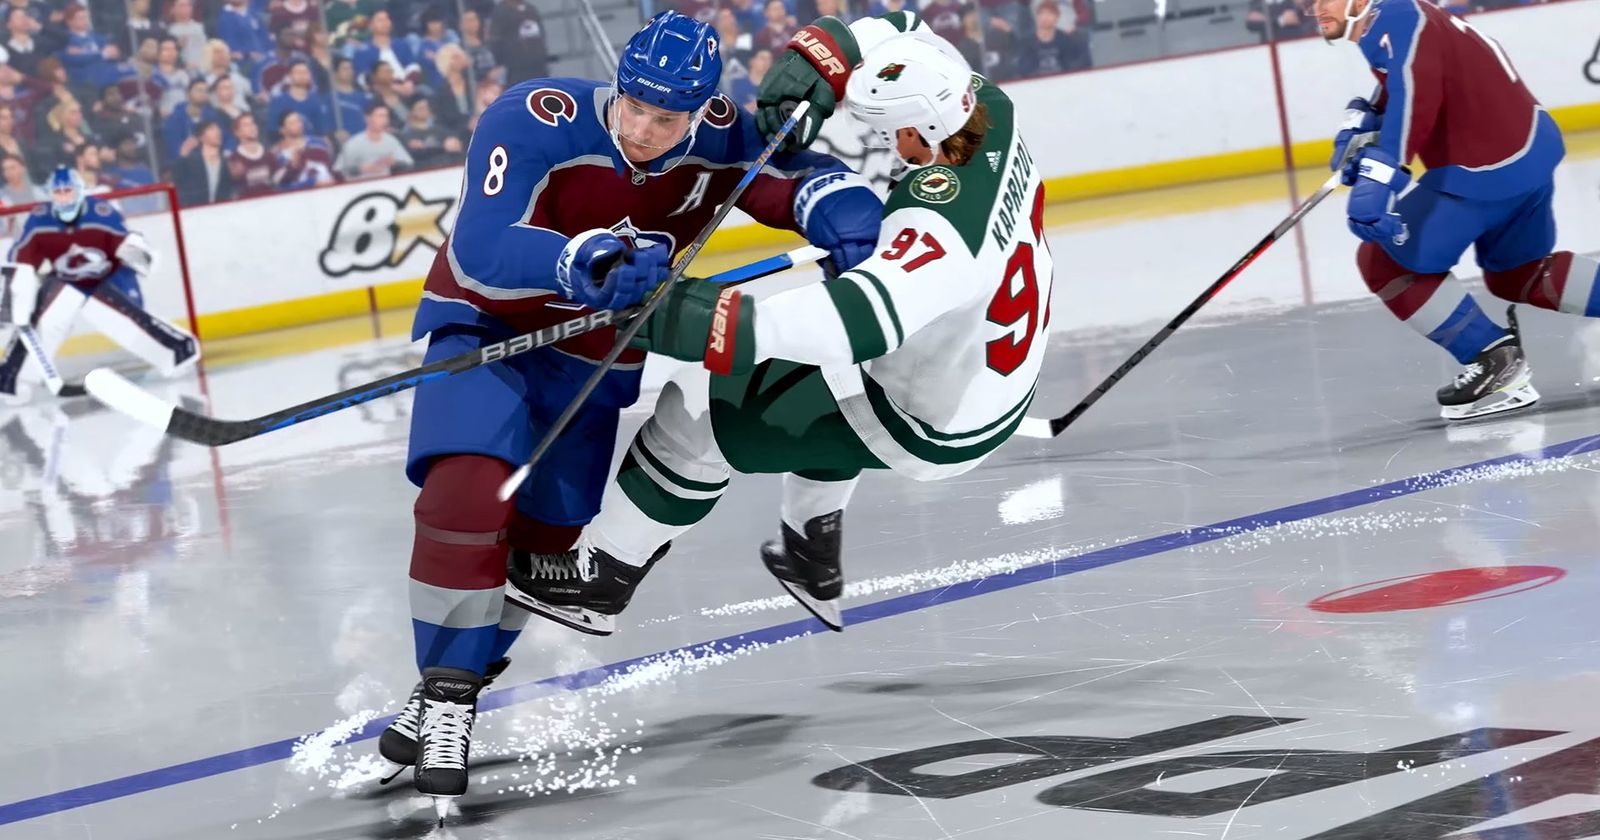 NHL 24: release date, early access, platforms, and all editions -  Meristation